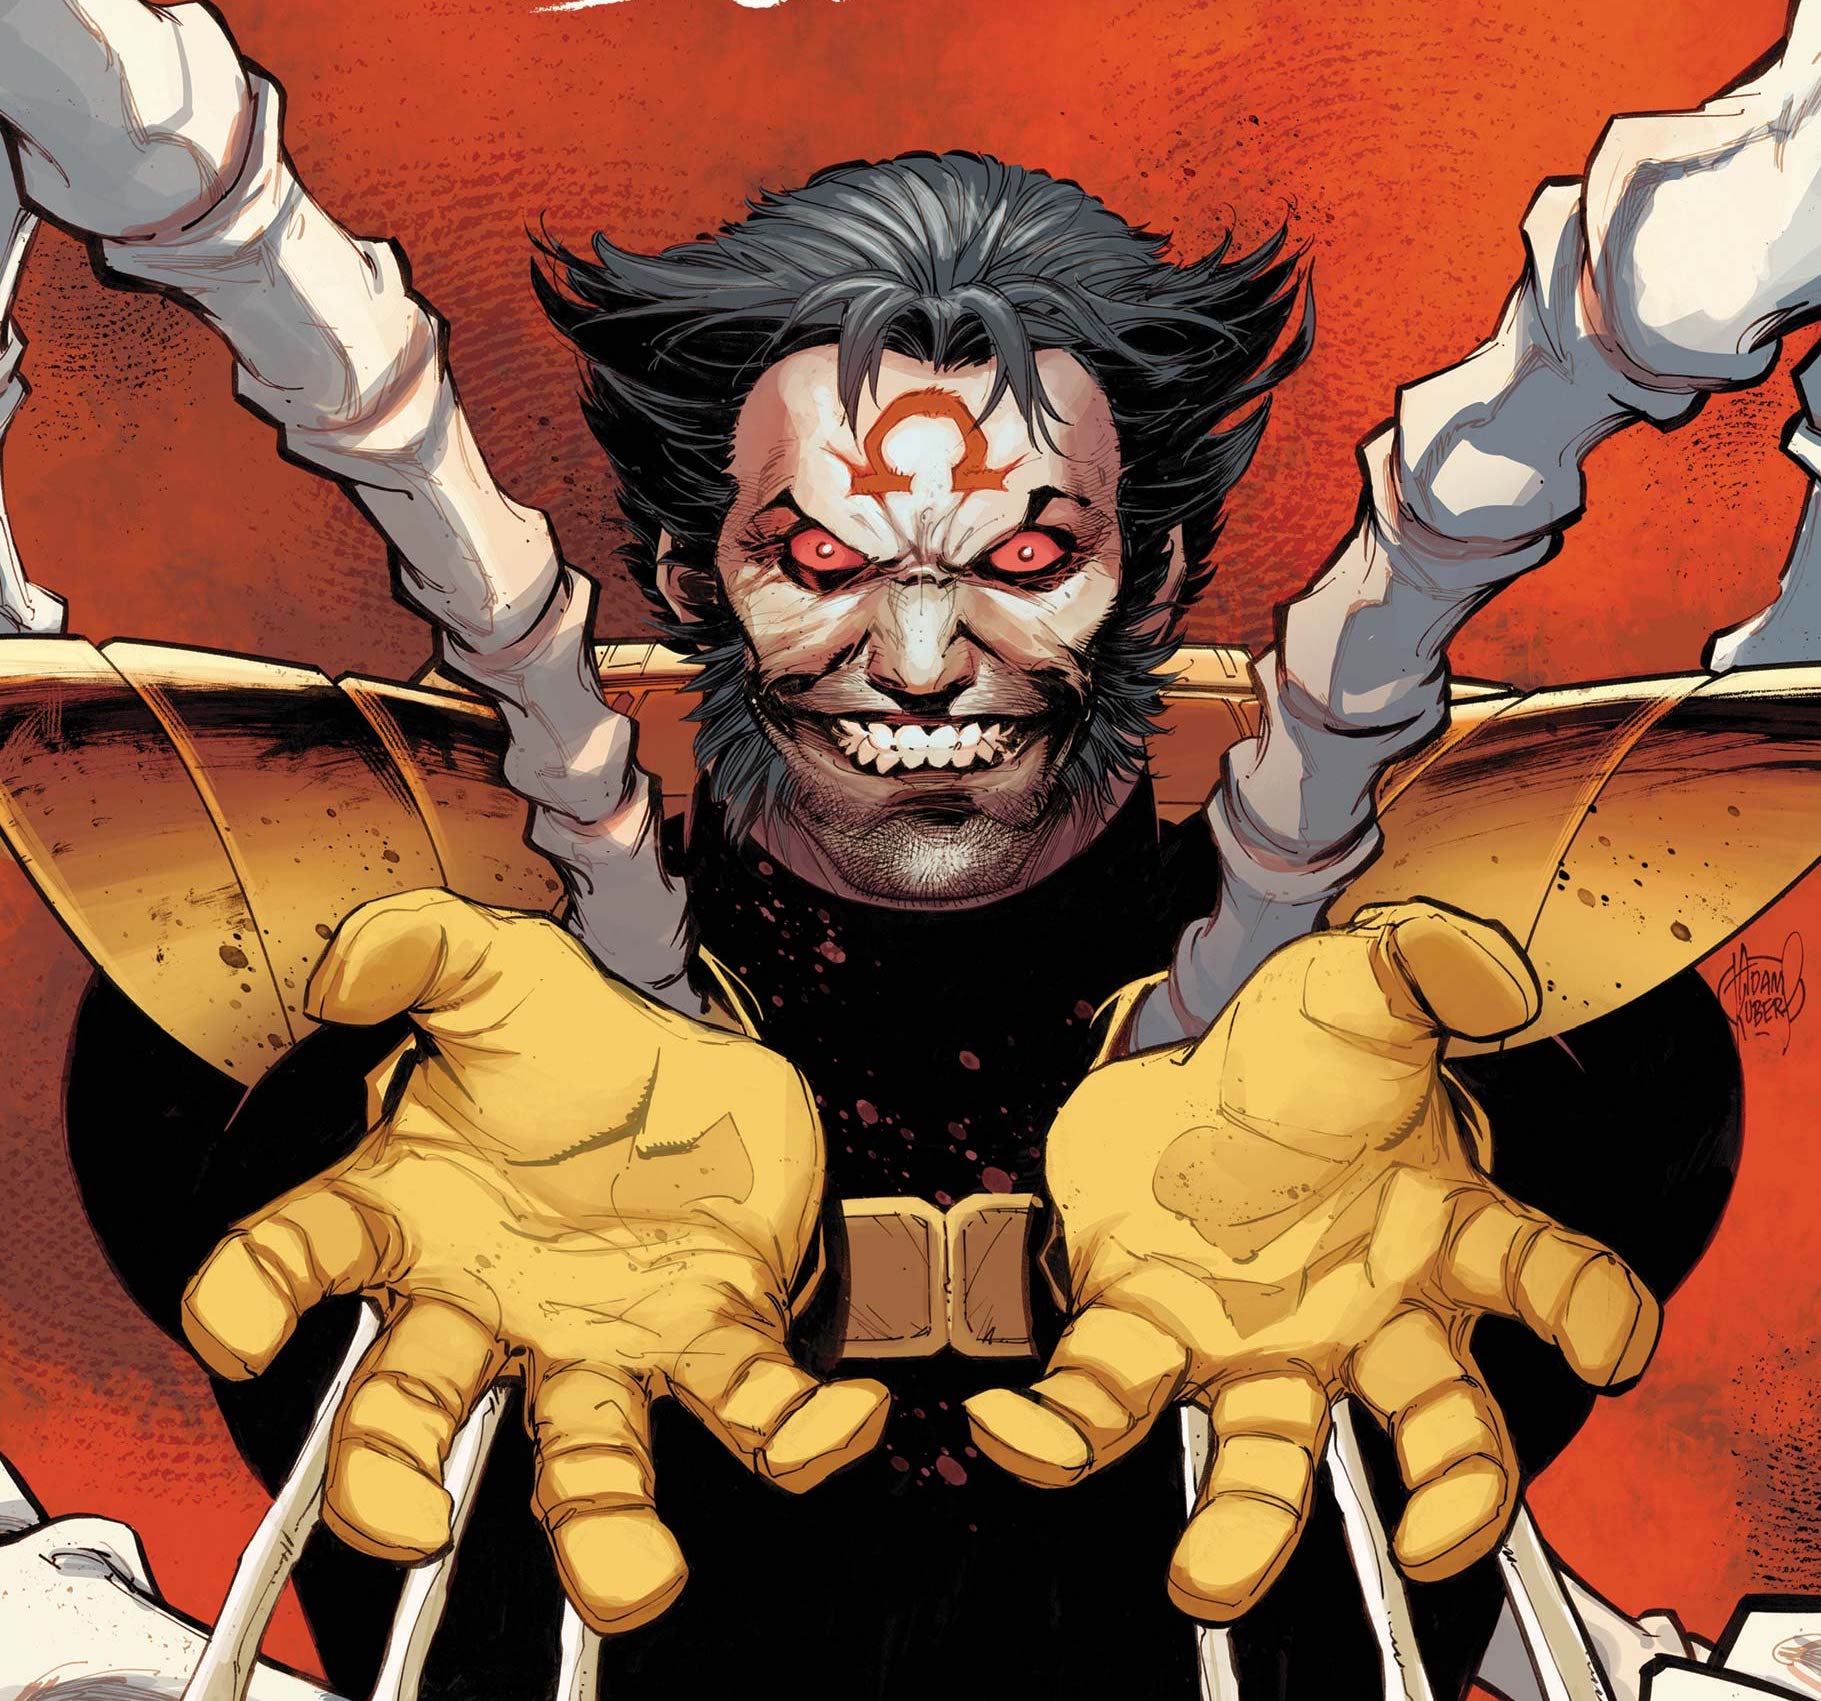 'X Lives of Wolverine' #4 explores the Weapon X period